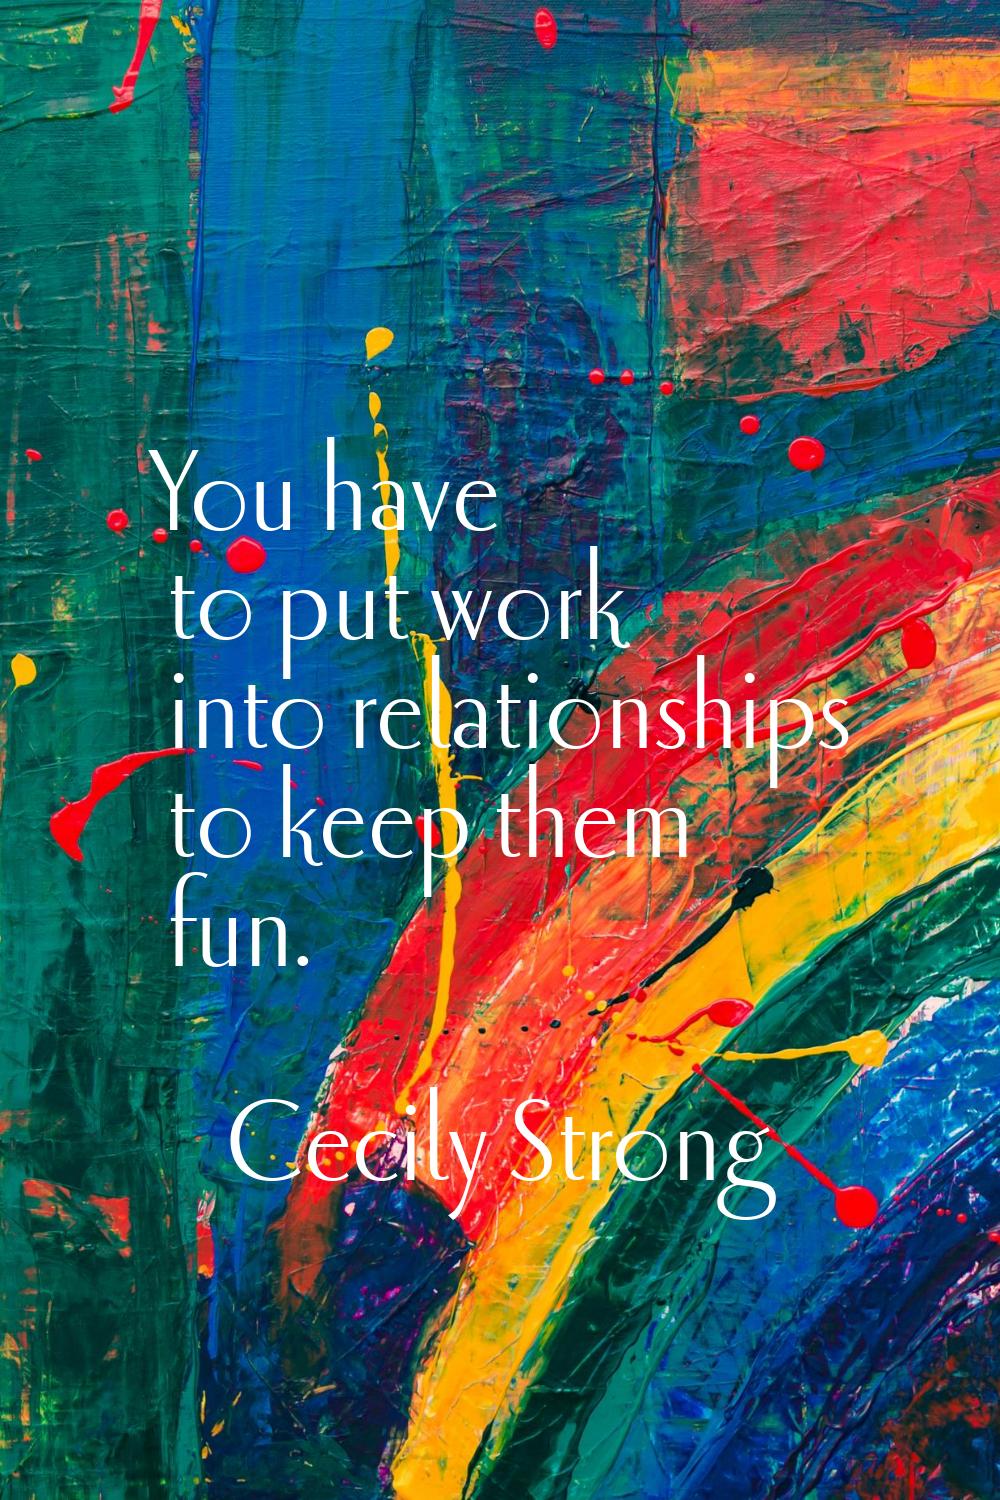 You have to put work into relationships to keep them fun.